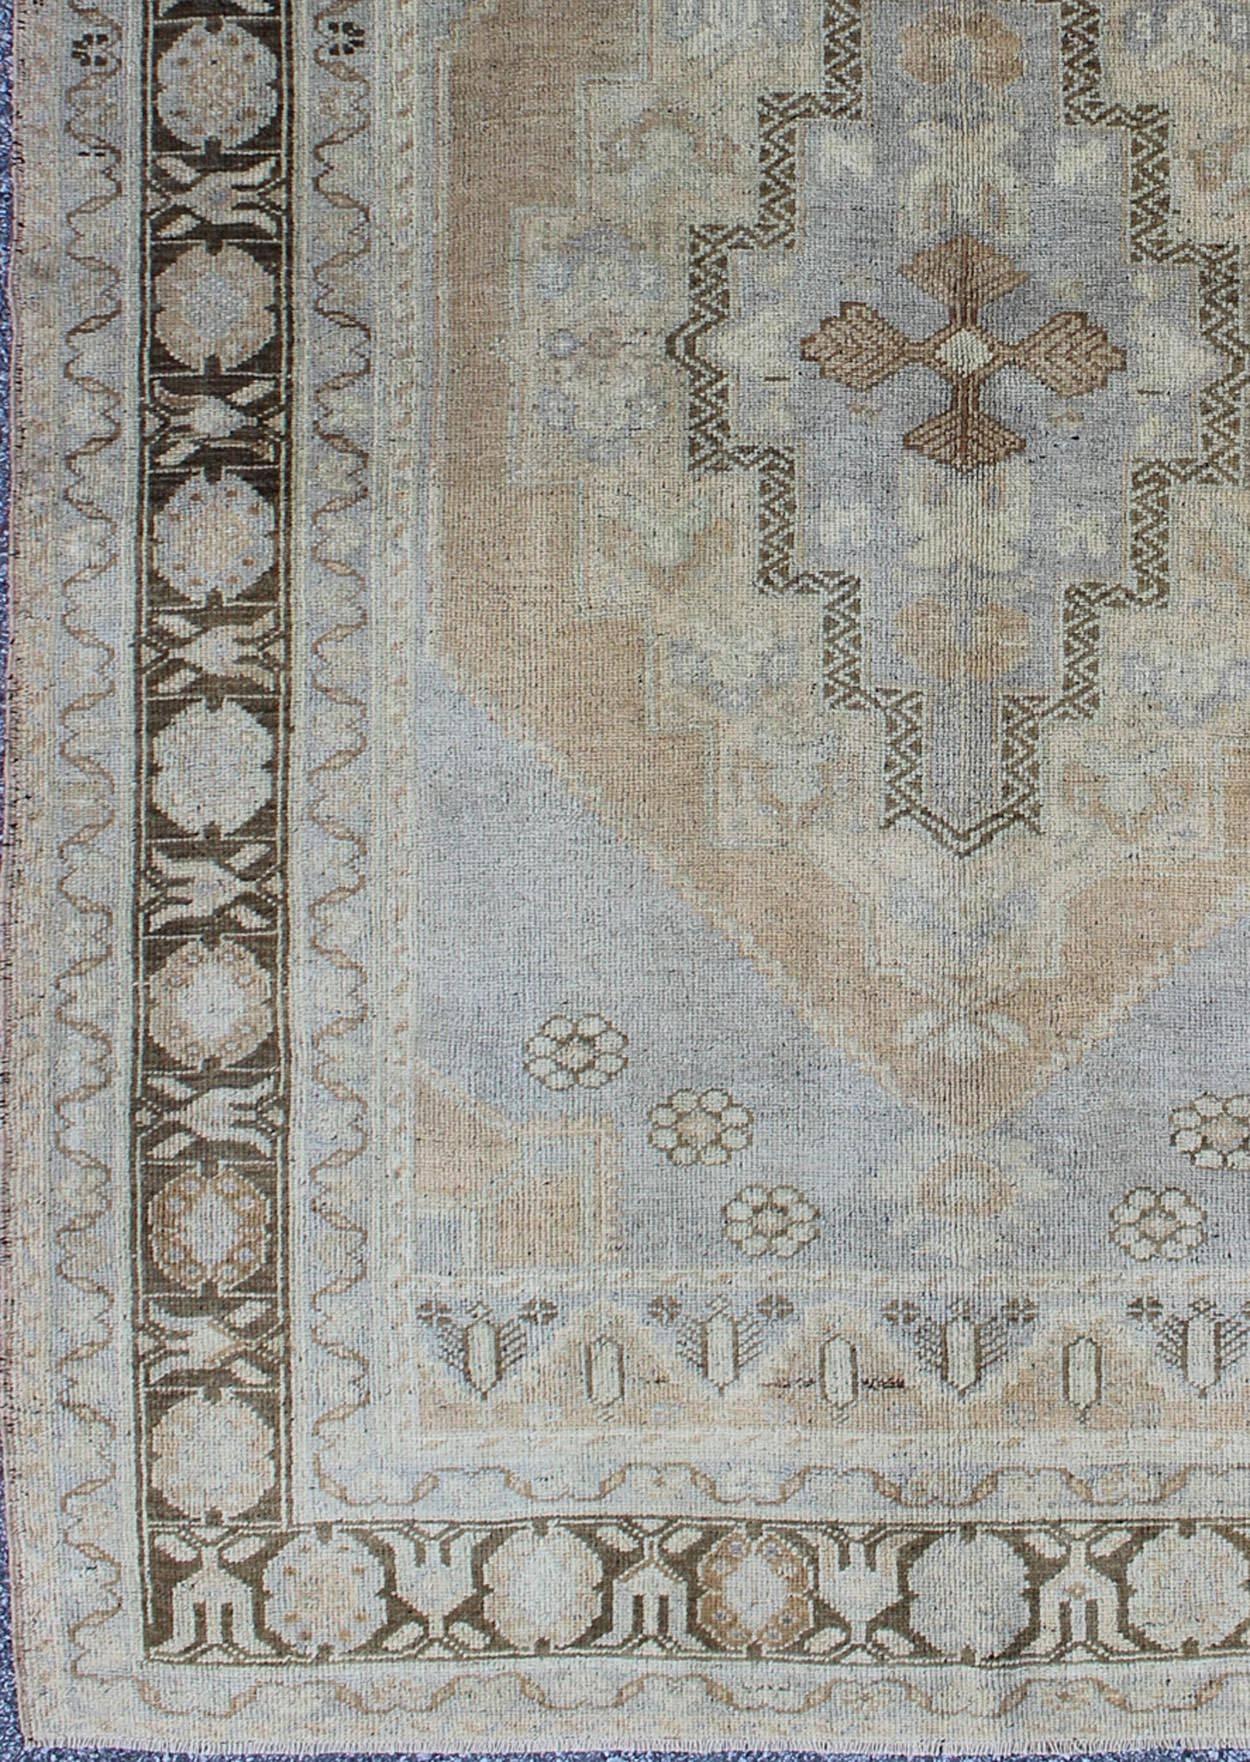 Periwinkle blue and tan vintage Turkish Oushak rug with layered medallion, rug tu-ugu-95167, country of origin / type: Turkey / Oushak, circa 1940s

This vintage Turkish Oushak carpet (circa mid-20th century) features a sub-geometric central